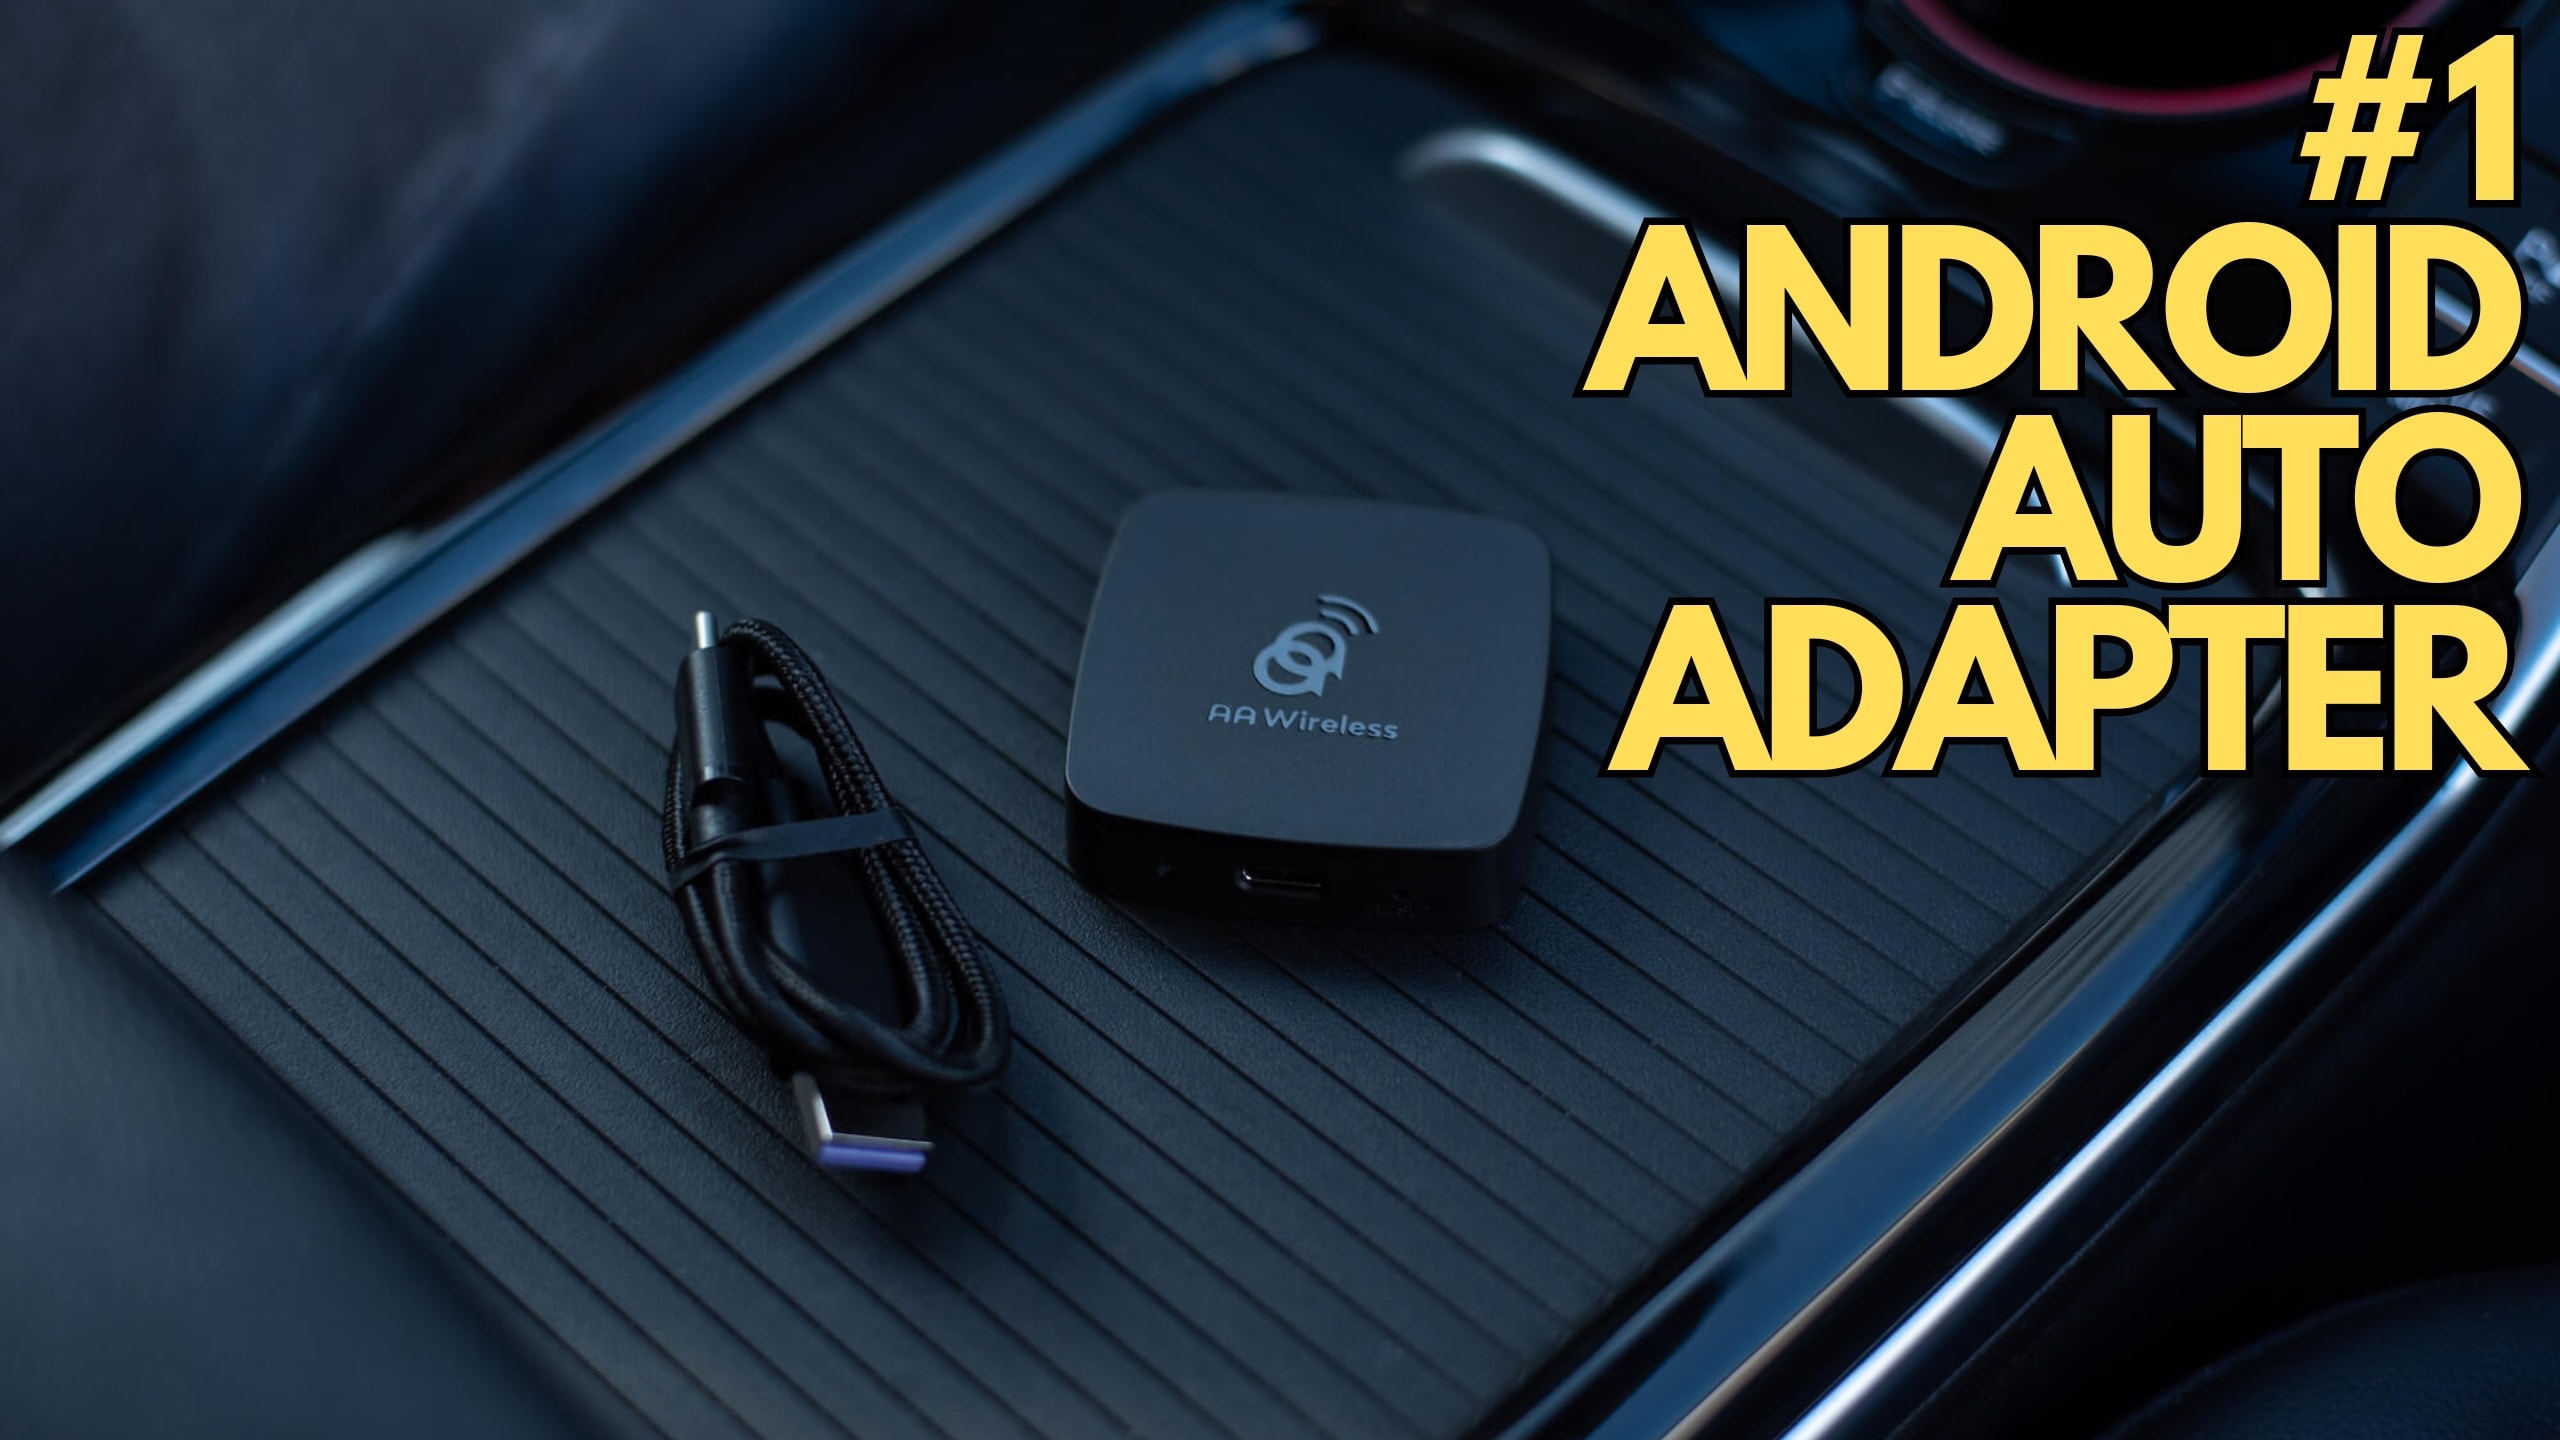 The World's Top Android Auto Wireless Adapter Is Now Cheaper - autoevolution